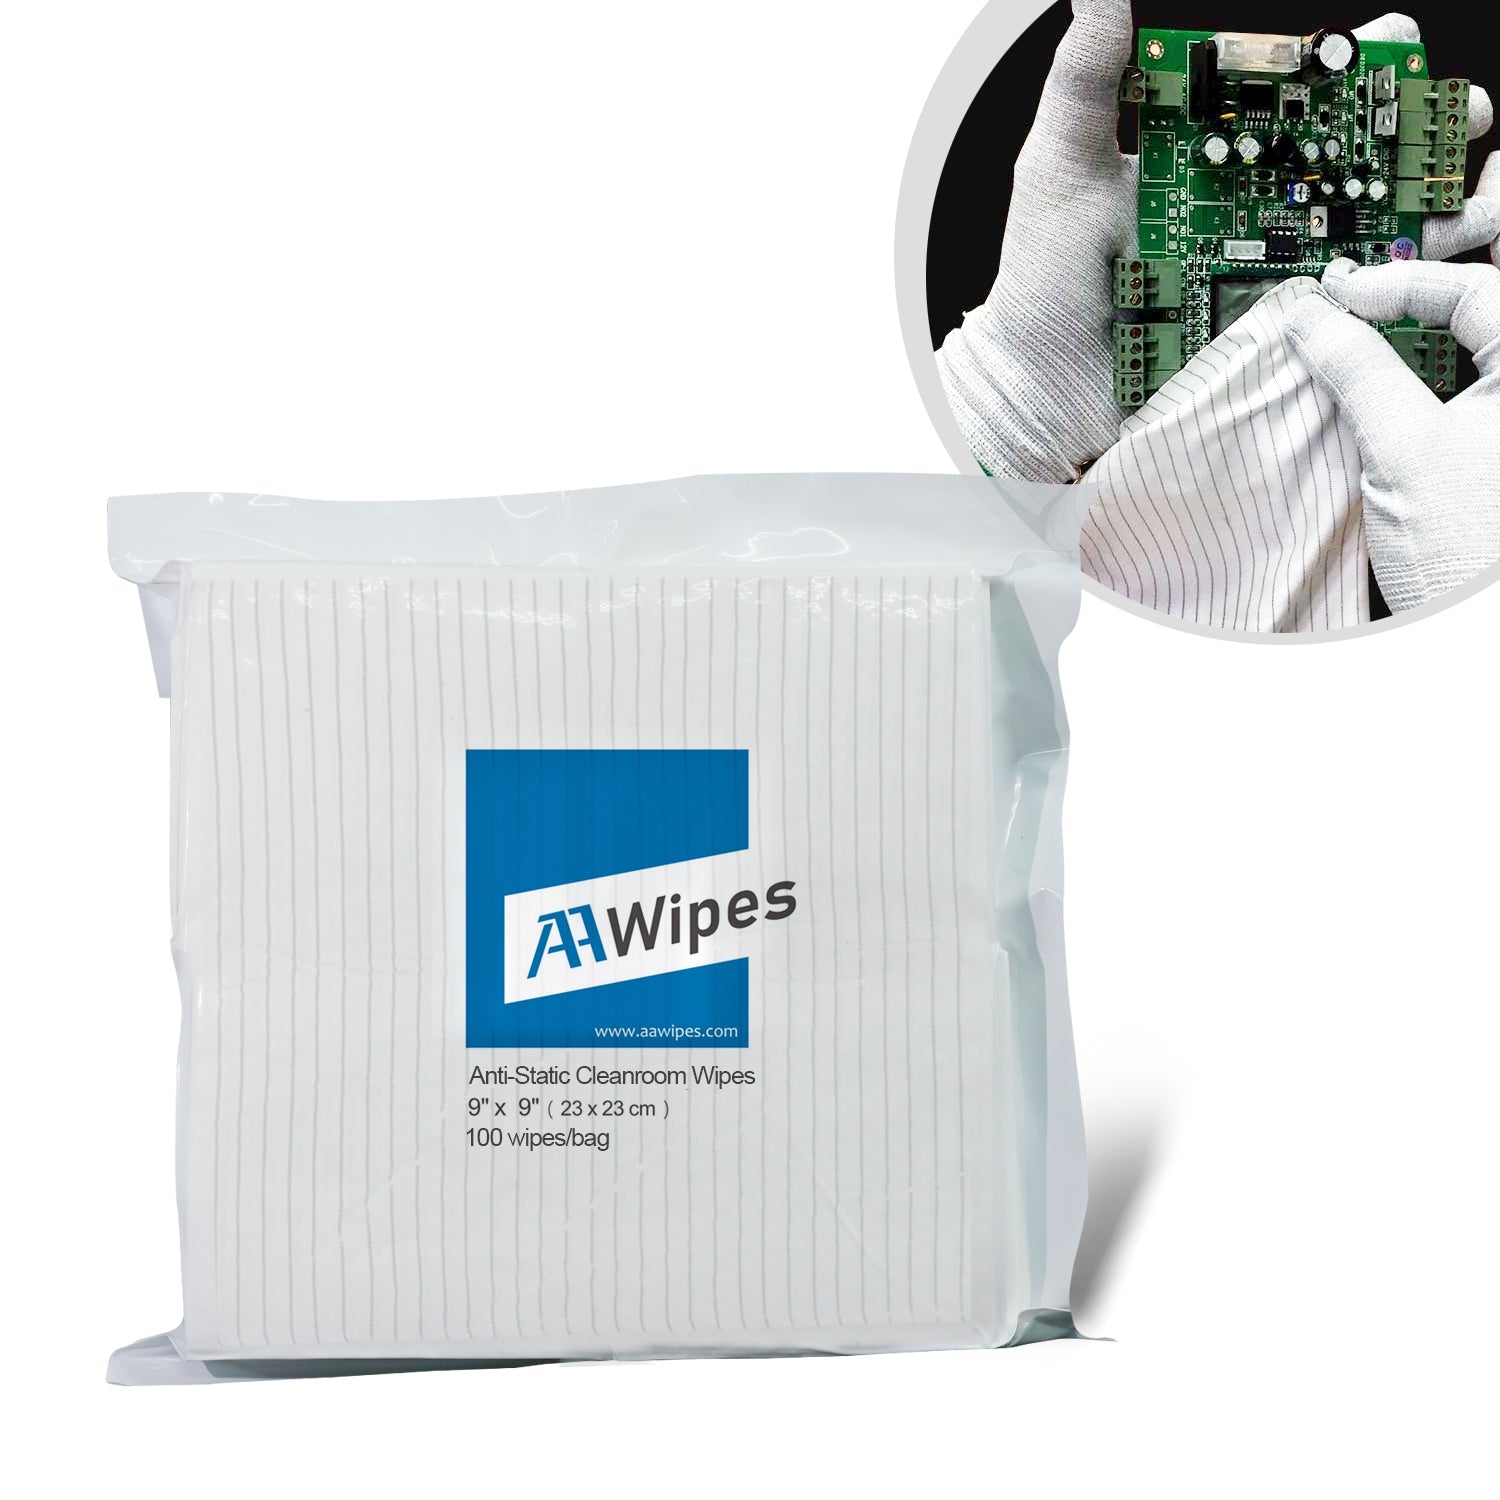 Scientific Instrument Services Inc Lint Free Wipes, 6in x 6in , Package of  600